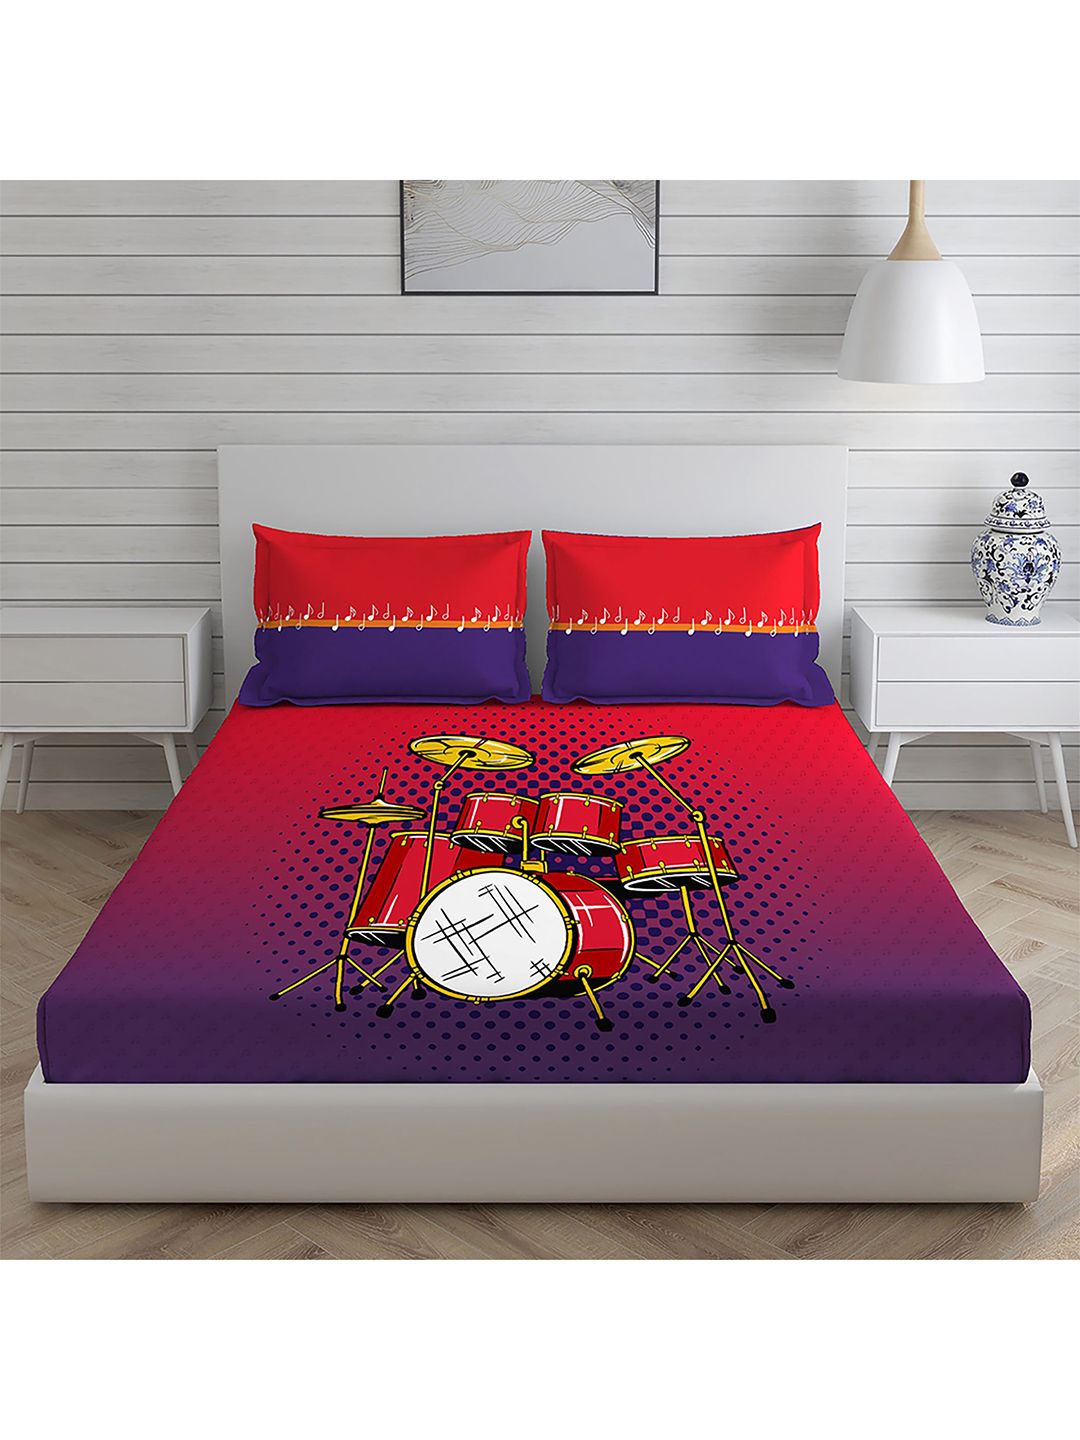 Boutique Living India Blue & Red Printed Pure Cotton 146 TC Bedding Set Price in India